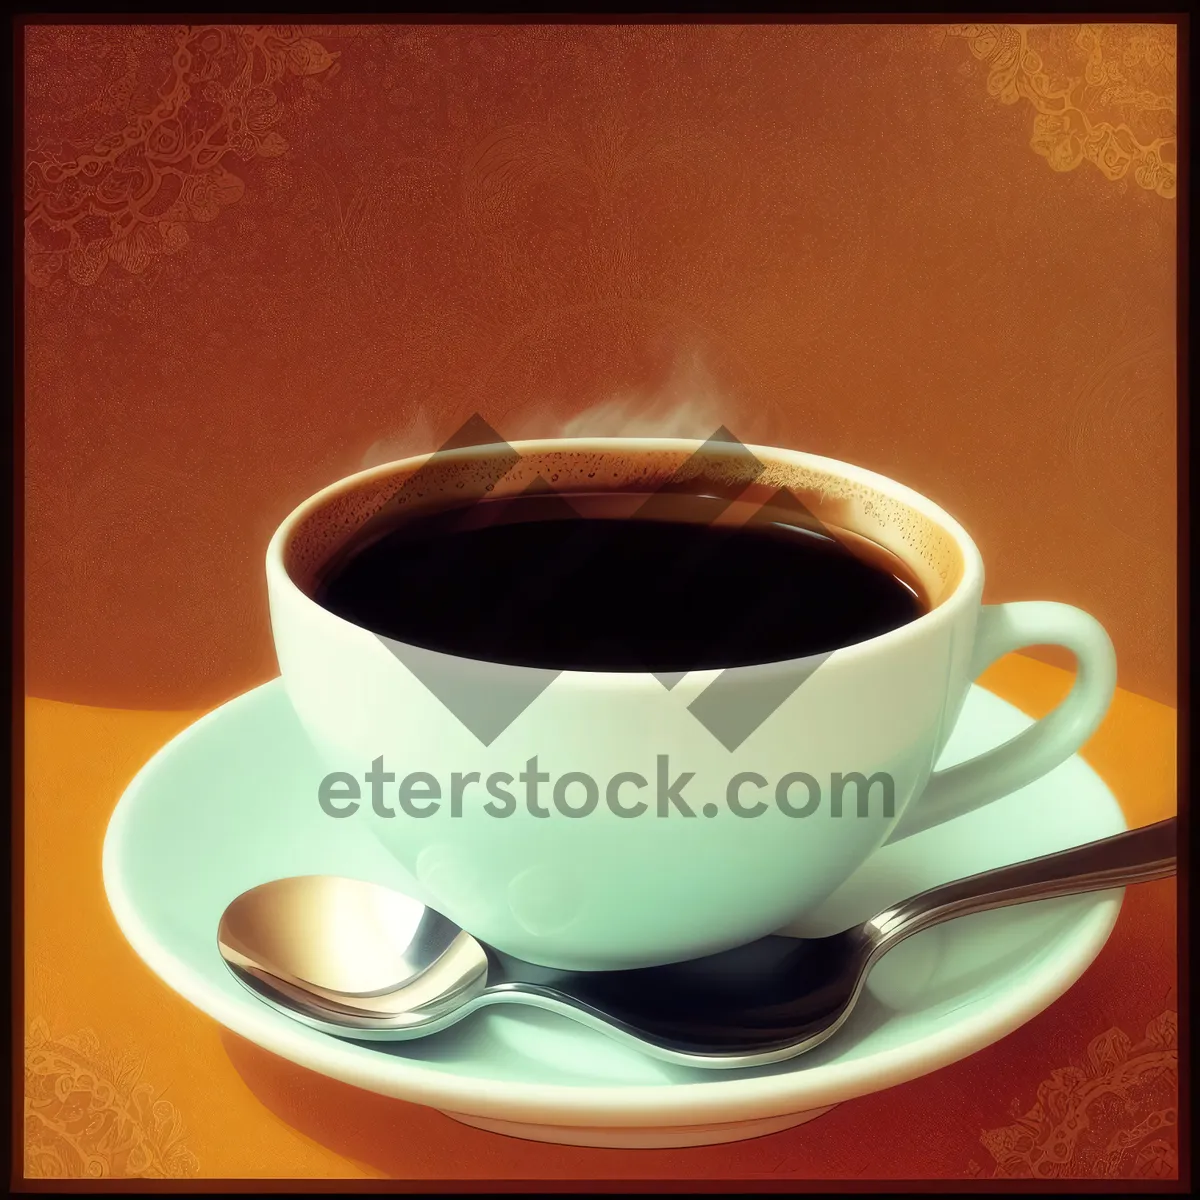 Picture of Morning Brew: Hot Espresso in a Stylish Cup